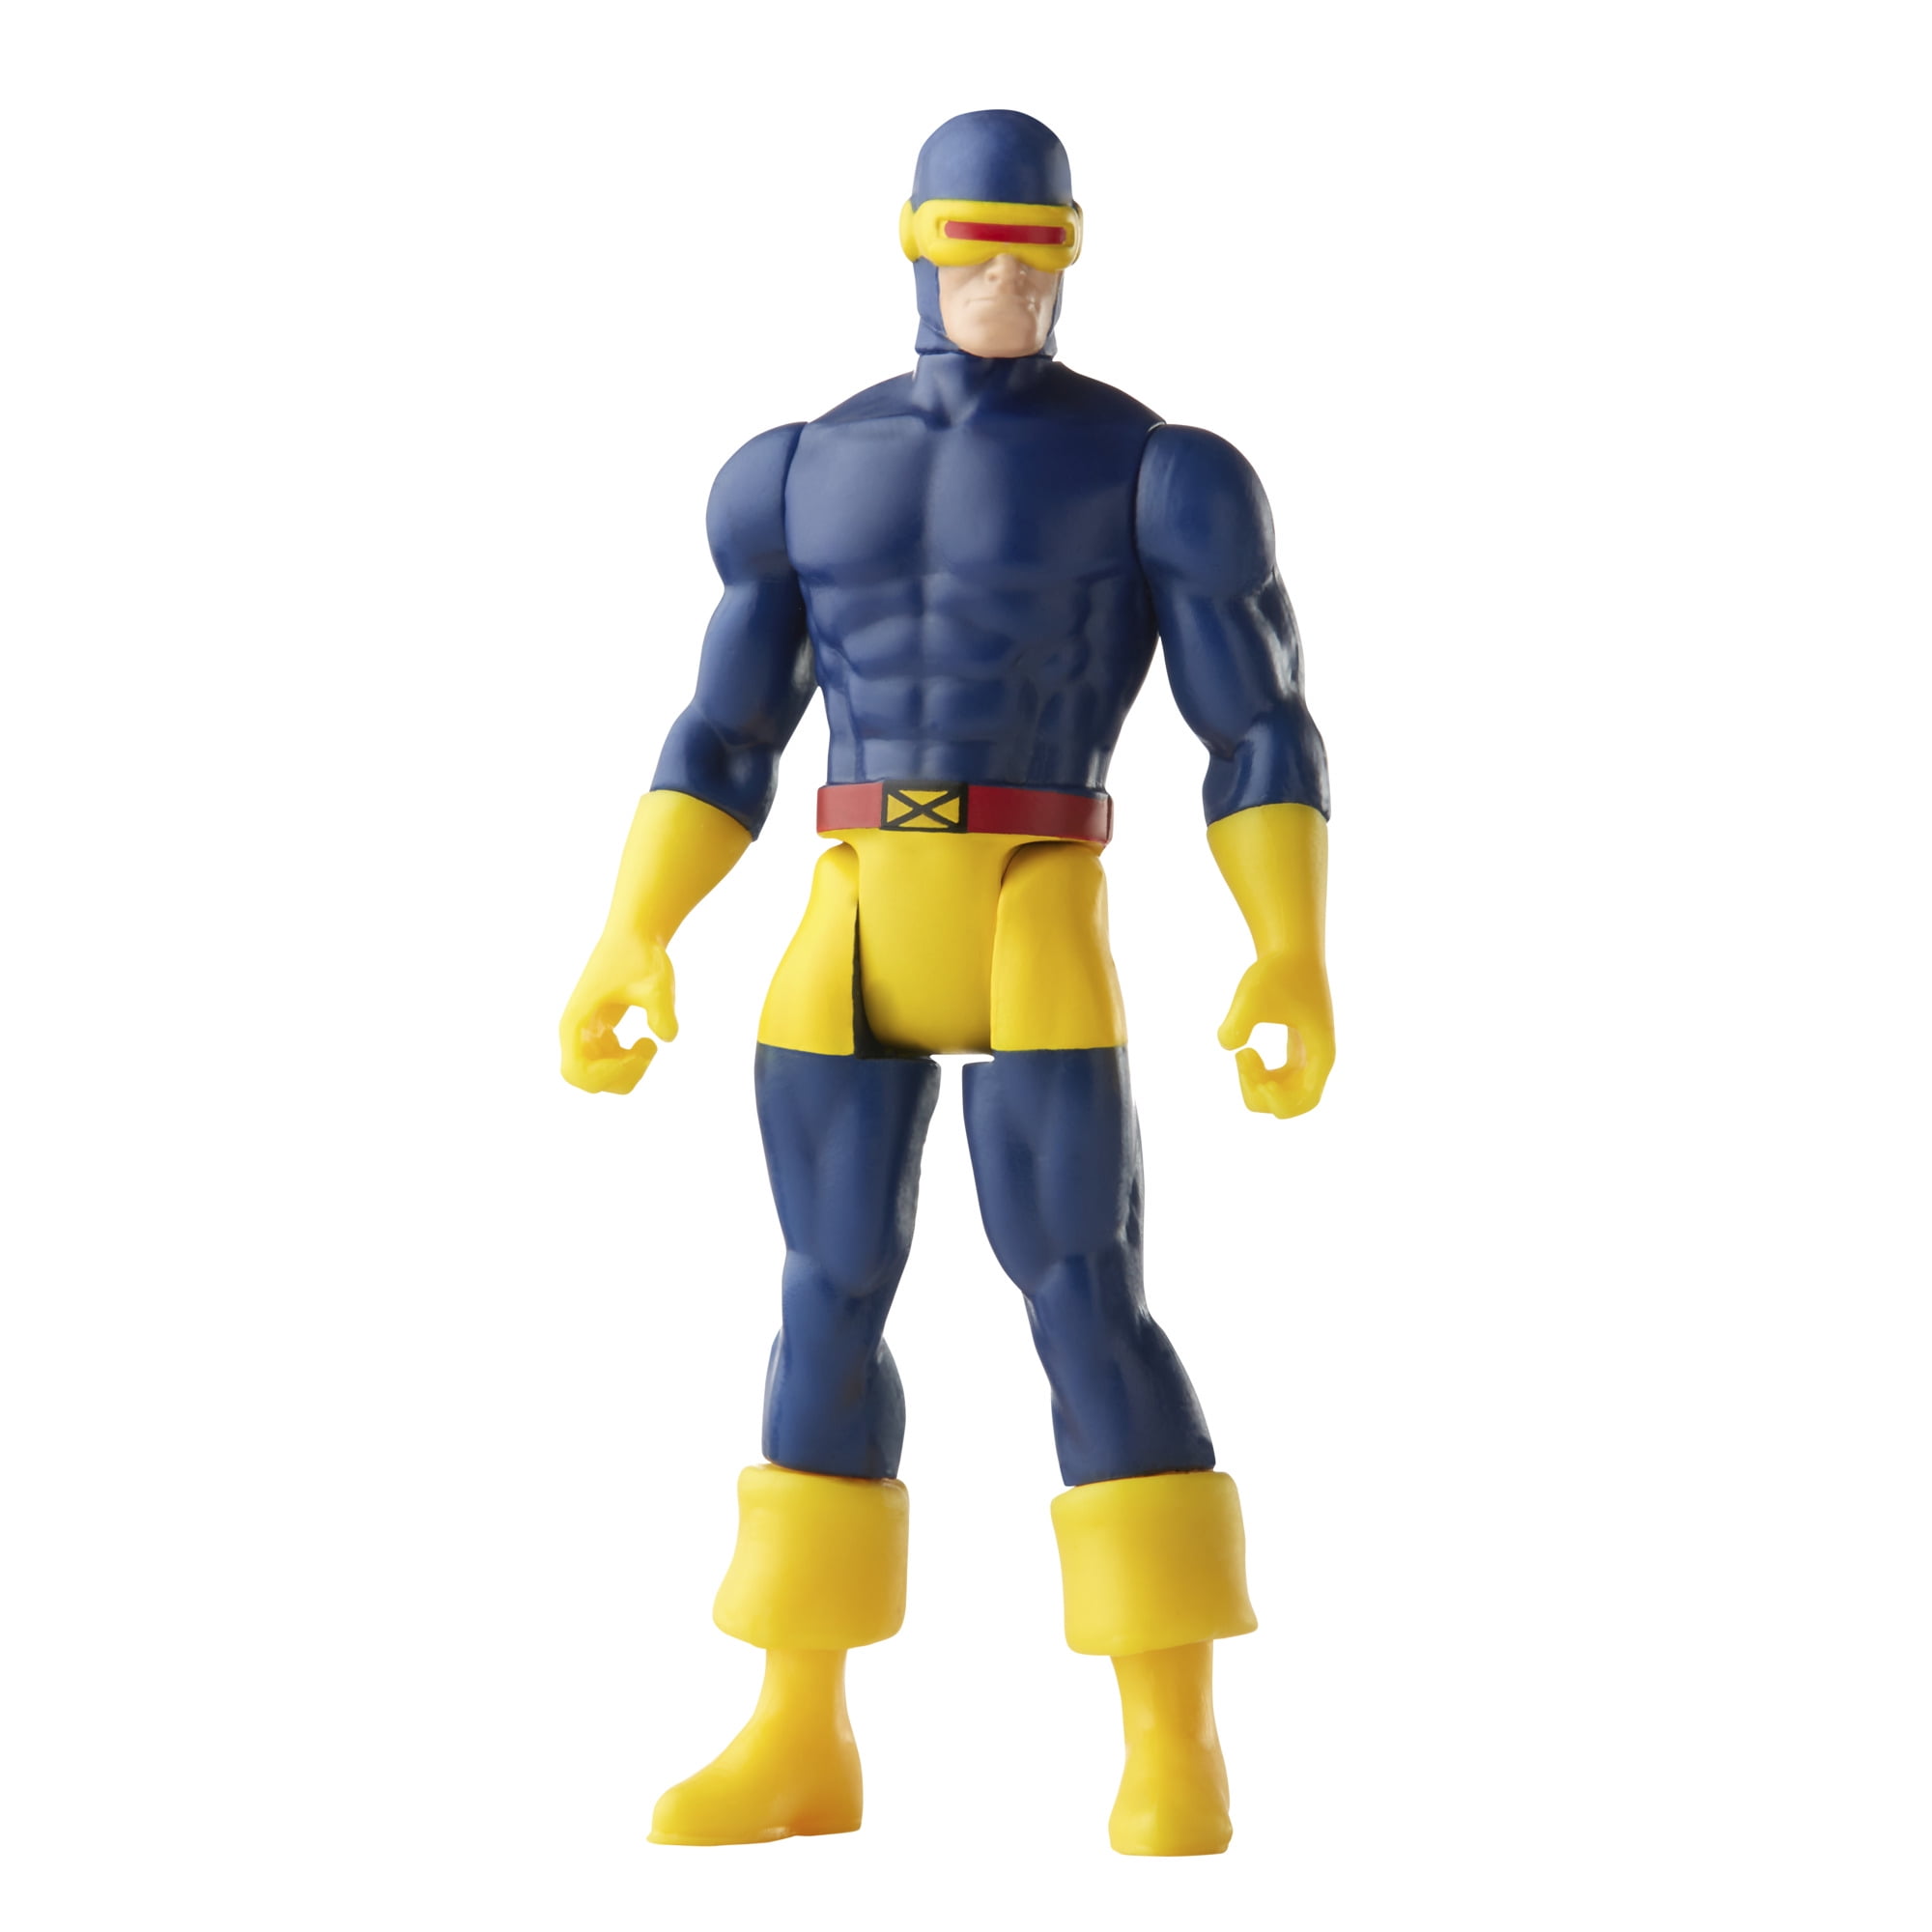 Marvel Universe 3 3/4 Inch Series 13 Action Figure Cyclops Hh6 for sale online 